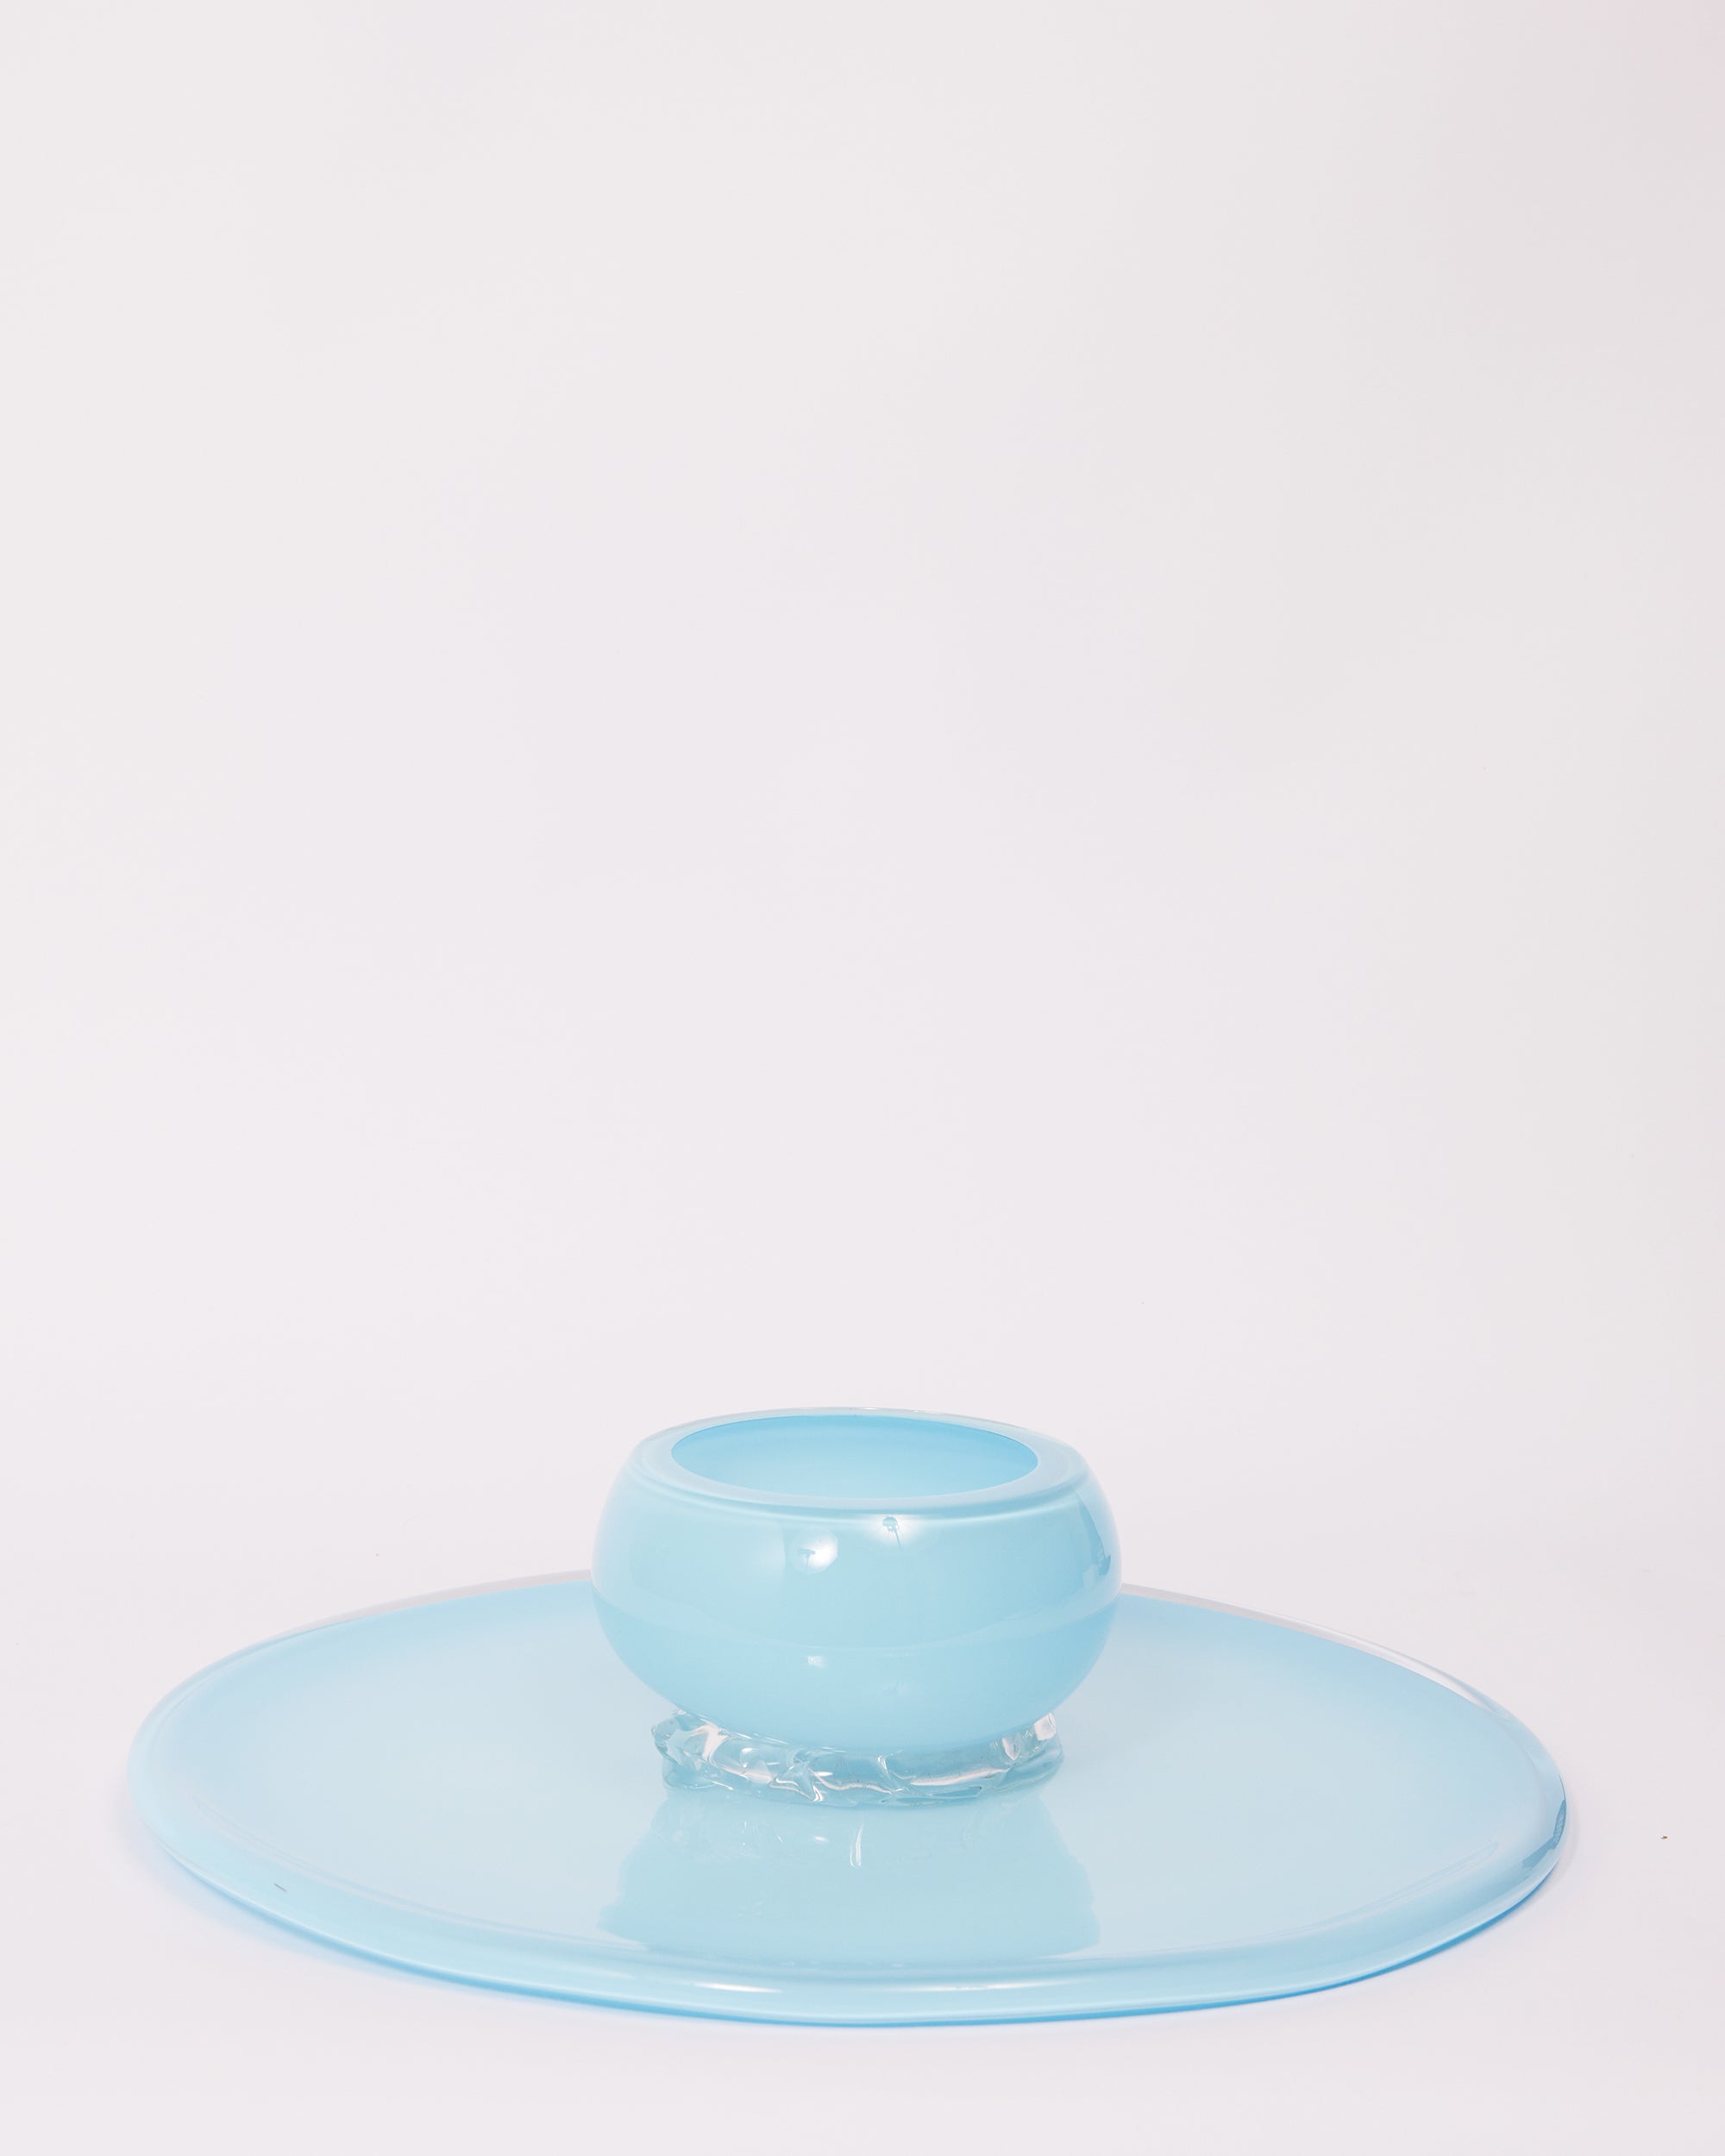 2 in 1 Cake Stand & Party Platter in Baby Blue with Opal Cover